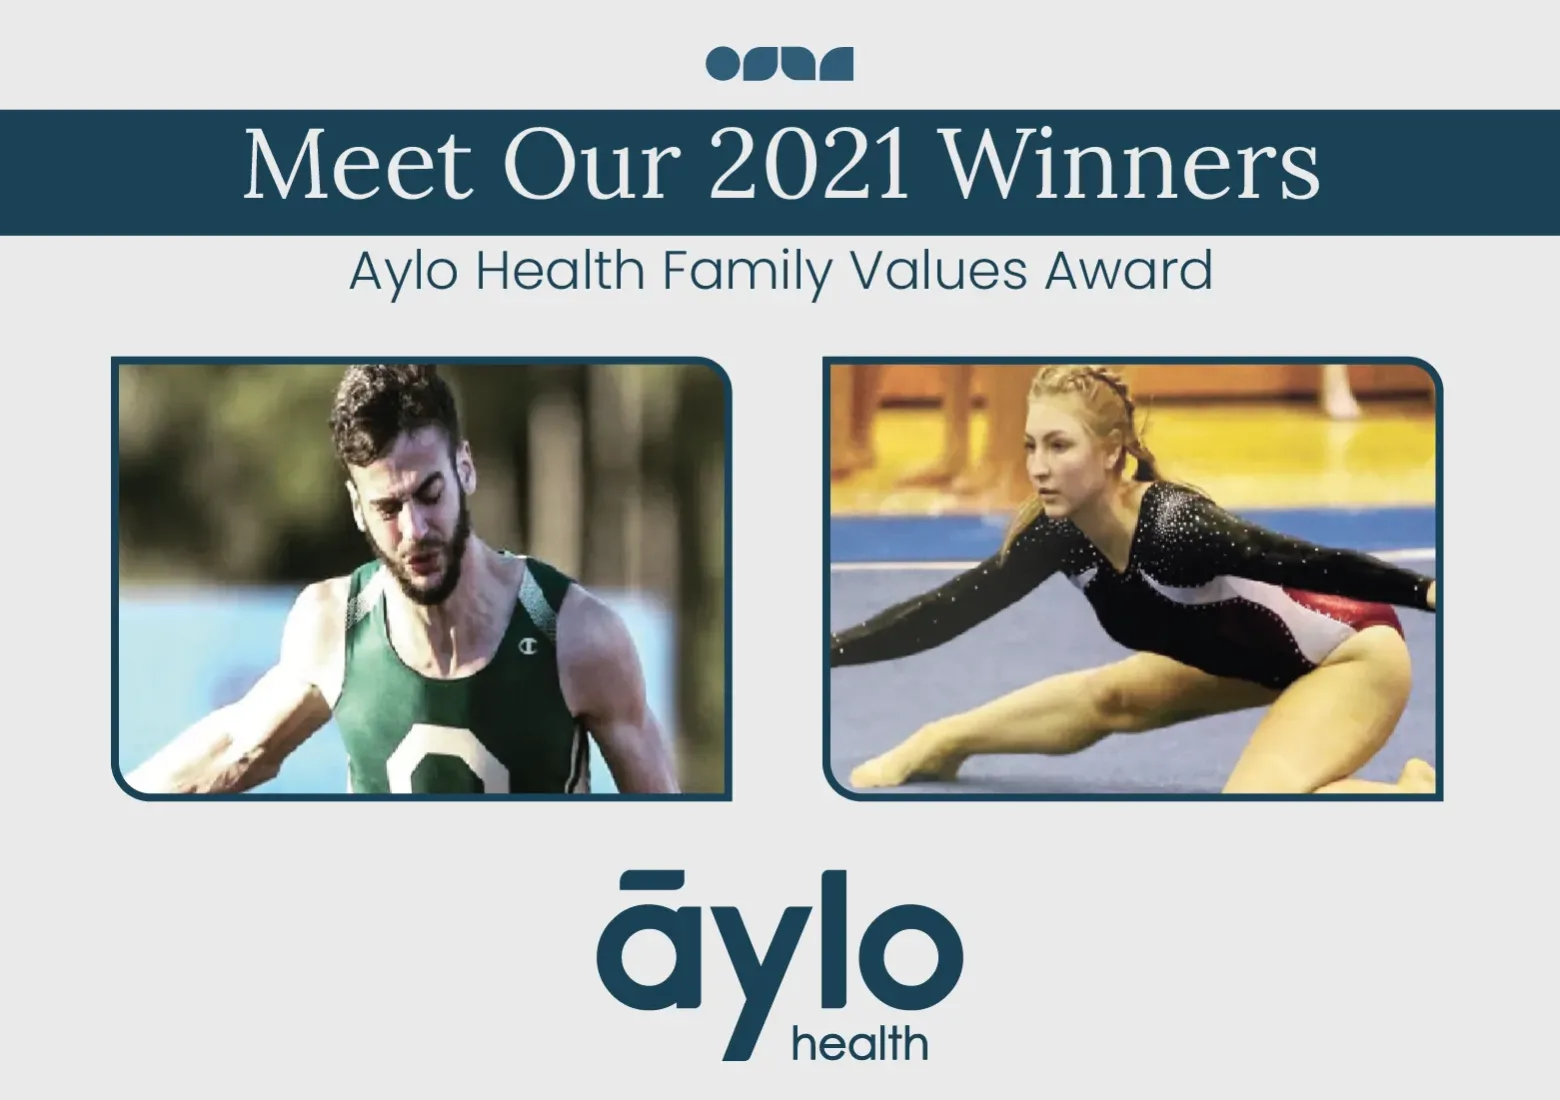 Meet Our 2021 Aylo Health Family Values Award Winners